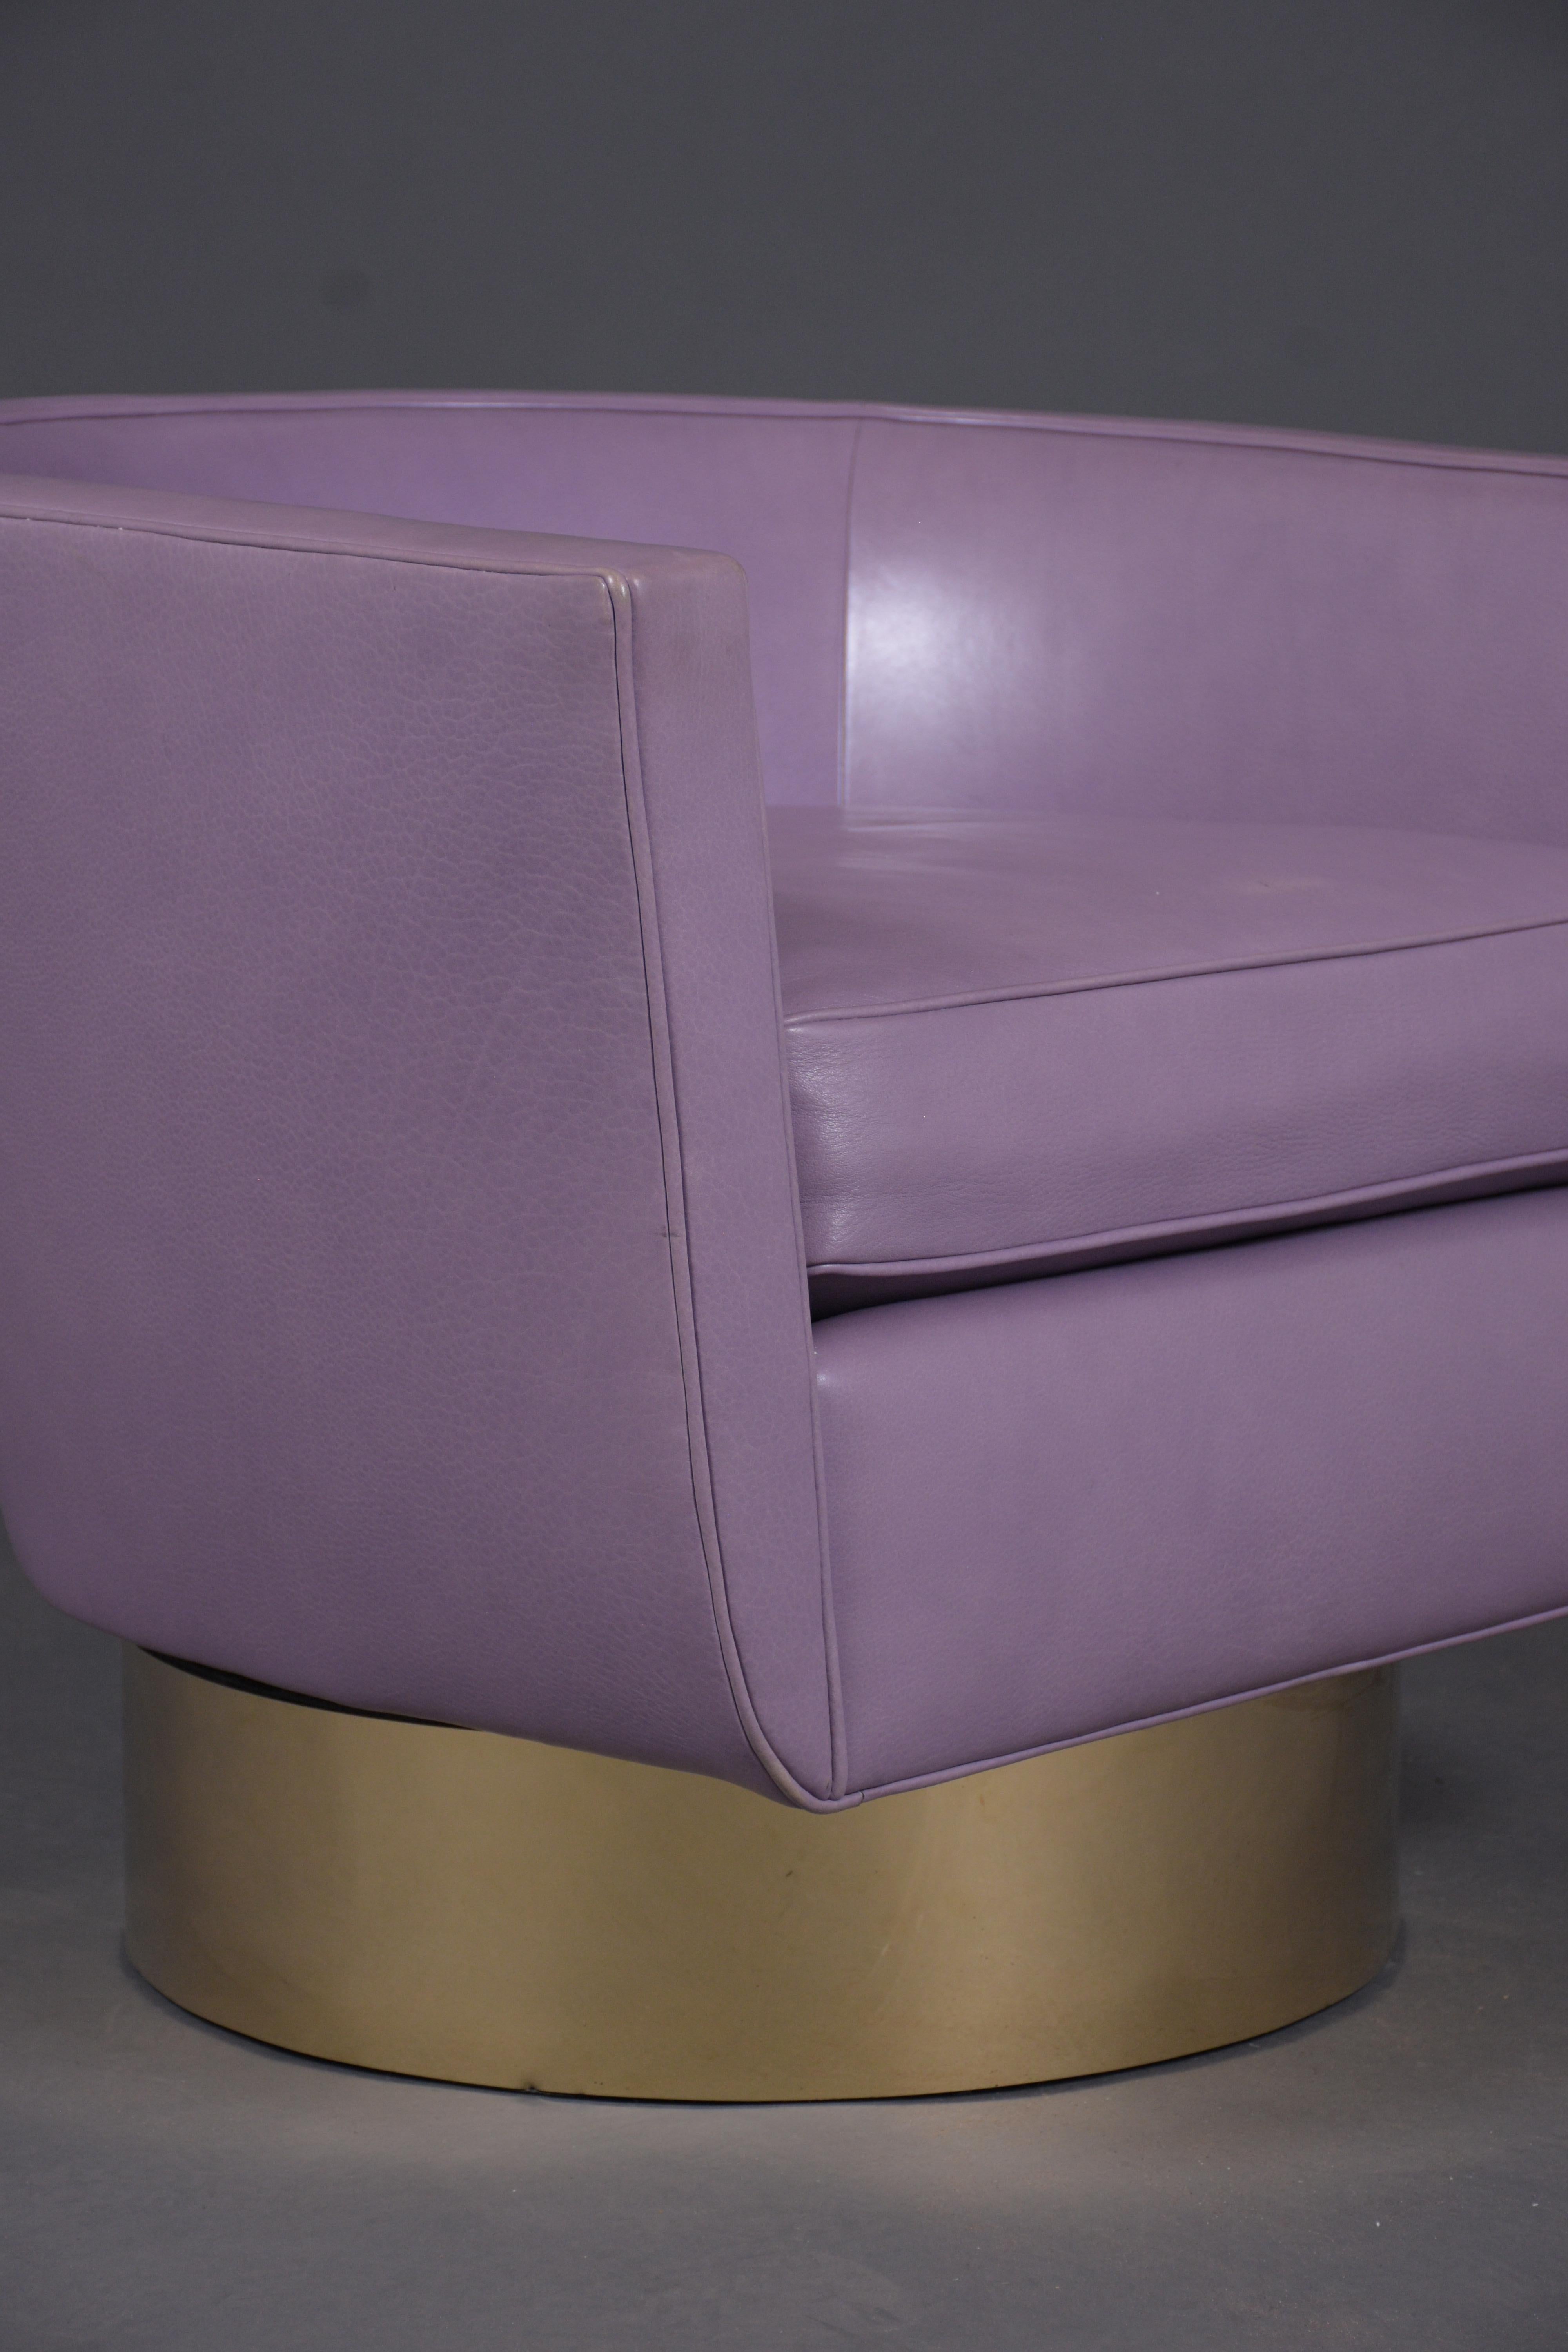 Restored Mid-Century Brass Swivel Chair in Violet Leather - Modern Elegance For Sale 1